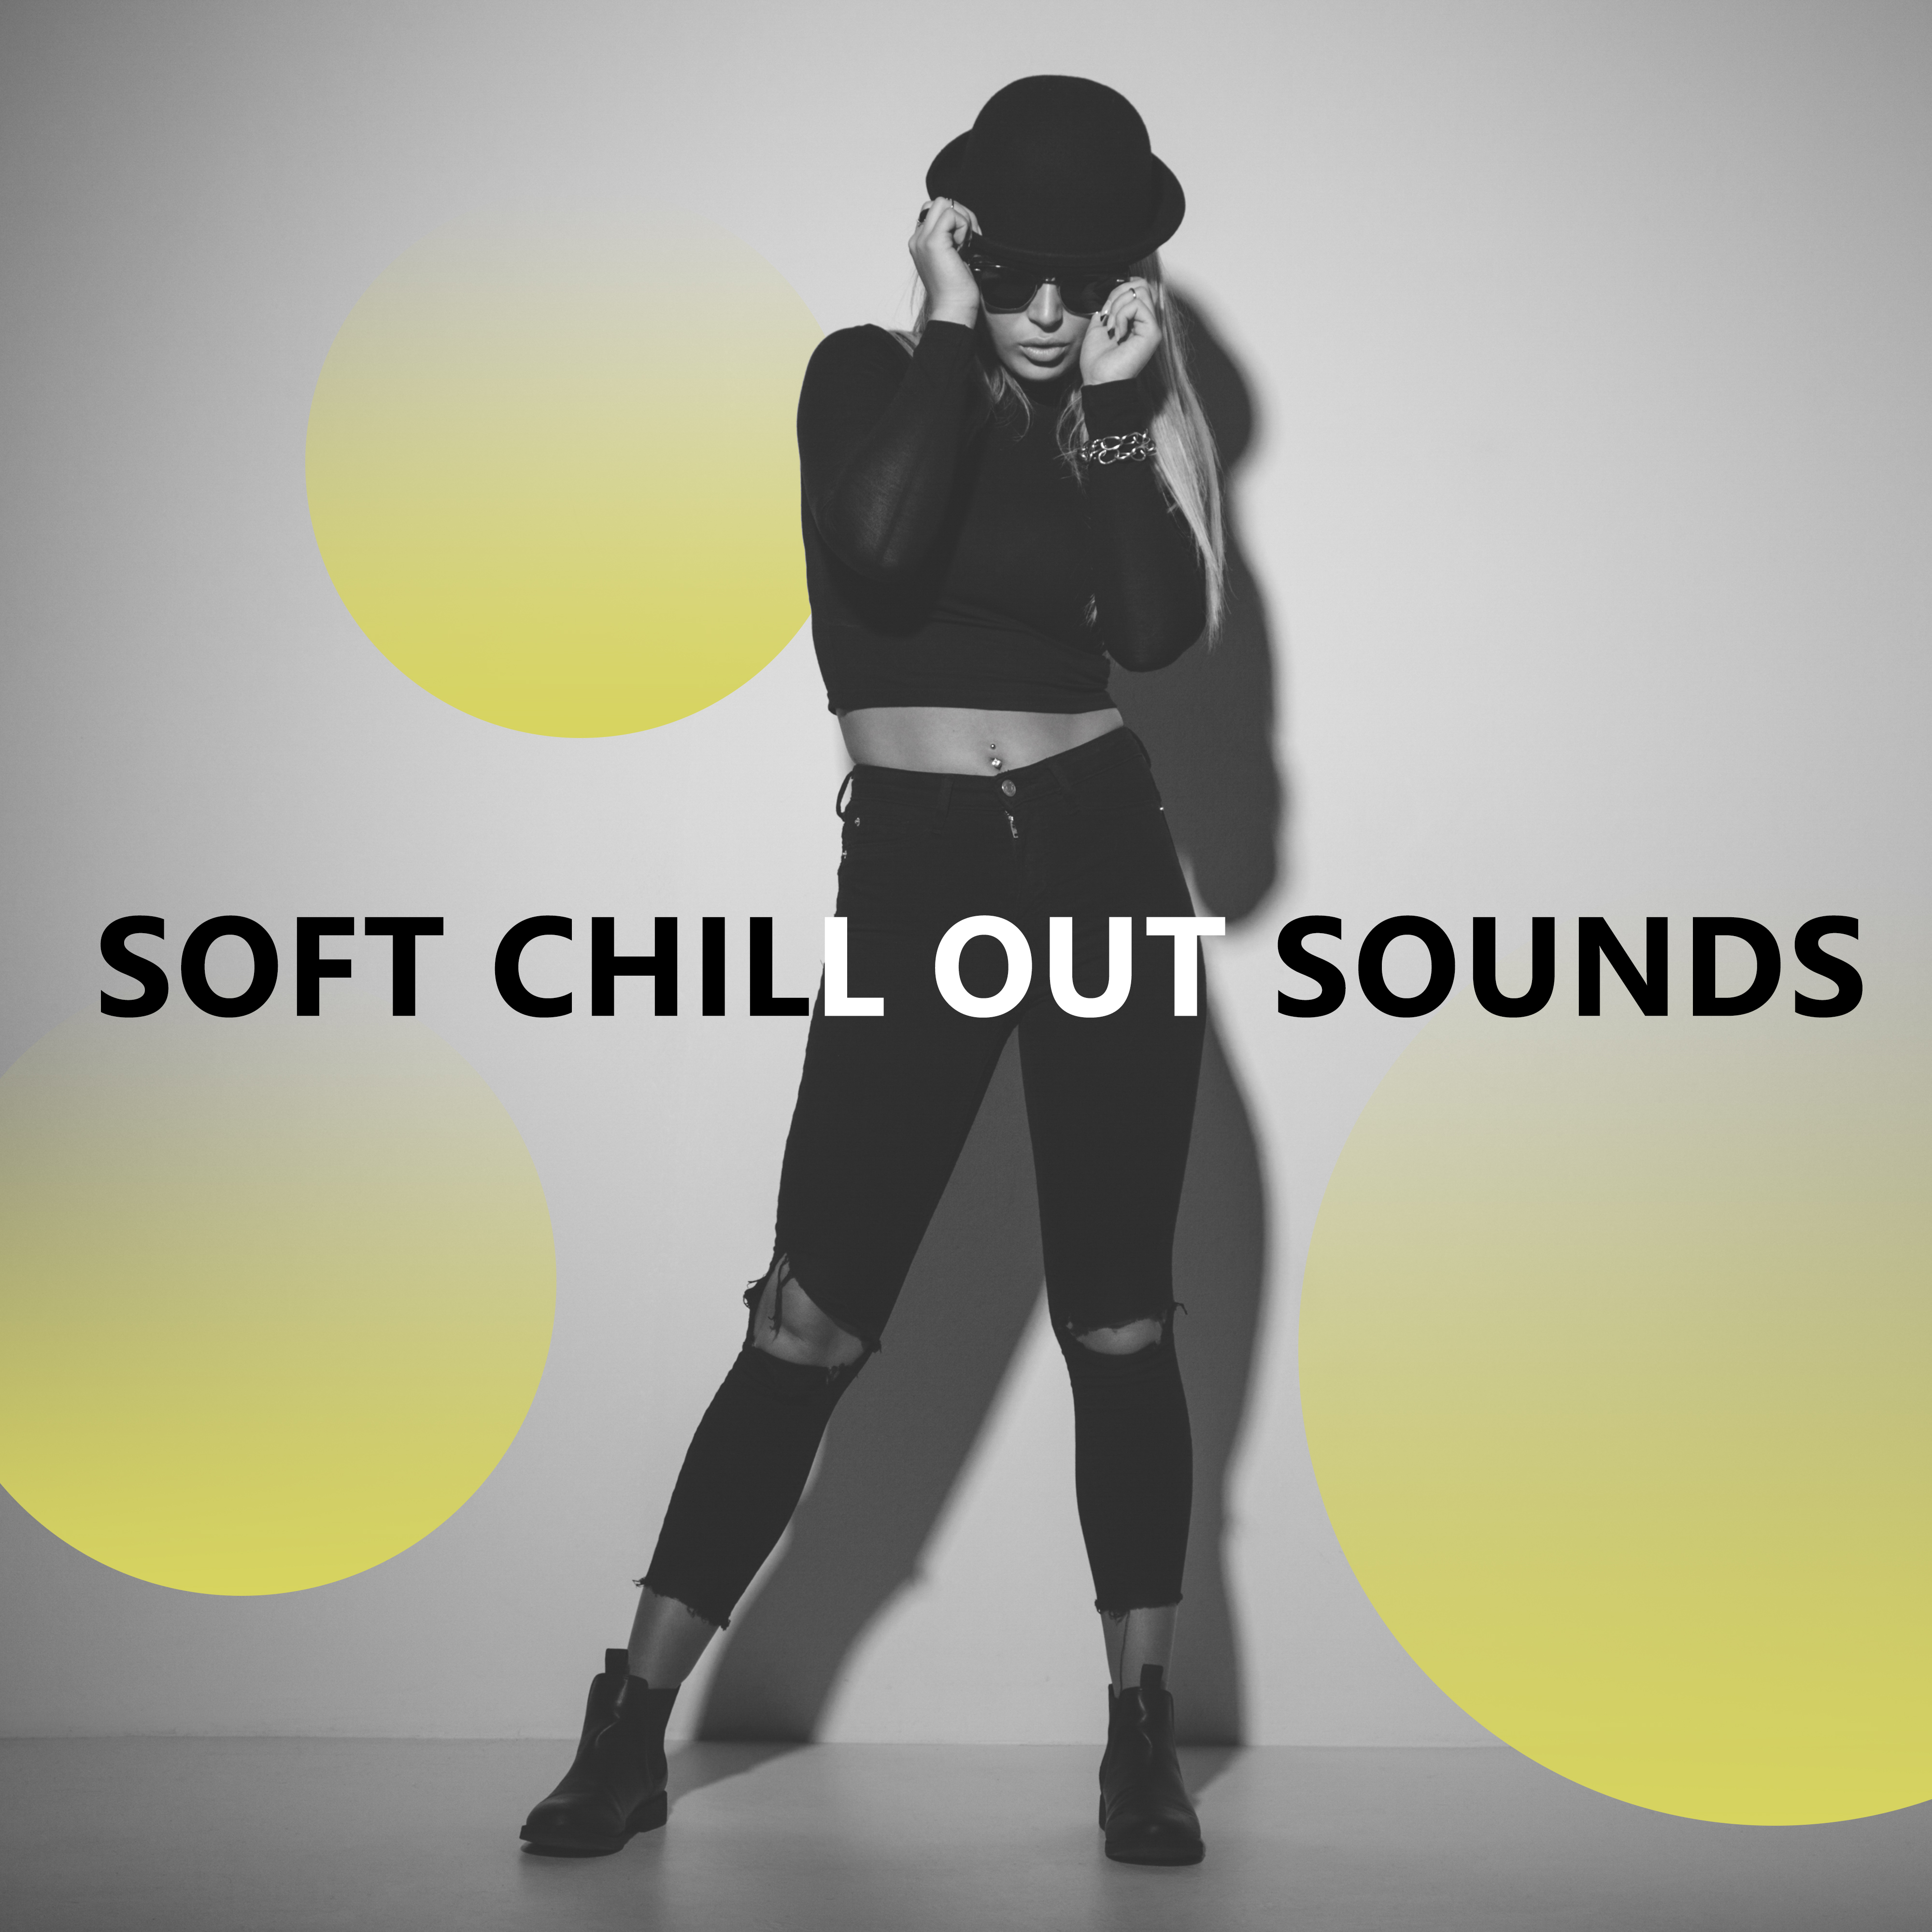 Soft Chill Out Sounds  Calm Down  Relax, Peaceful Vibes, Stress Relief, Chill Out Beats